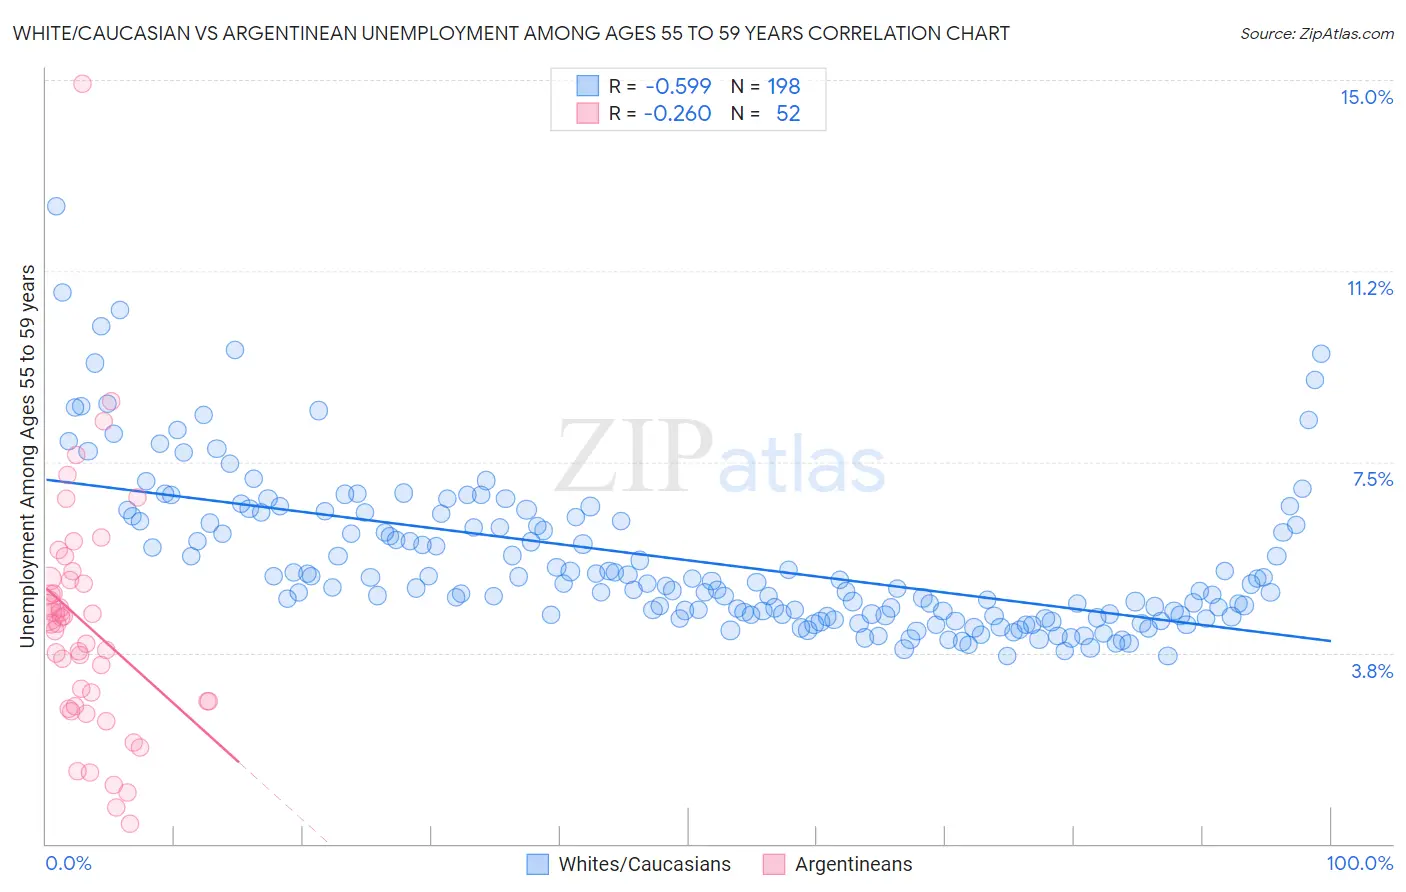 White/Caucasian vs Argentinean Unemployment Among Ages 55 to 59 years